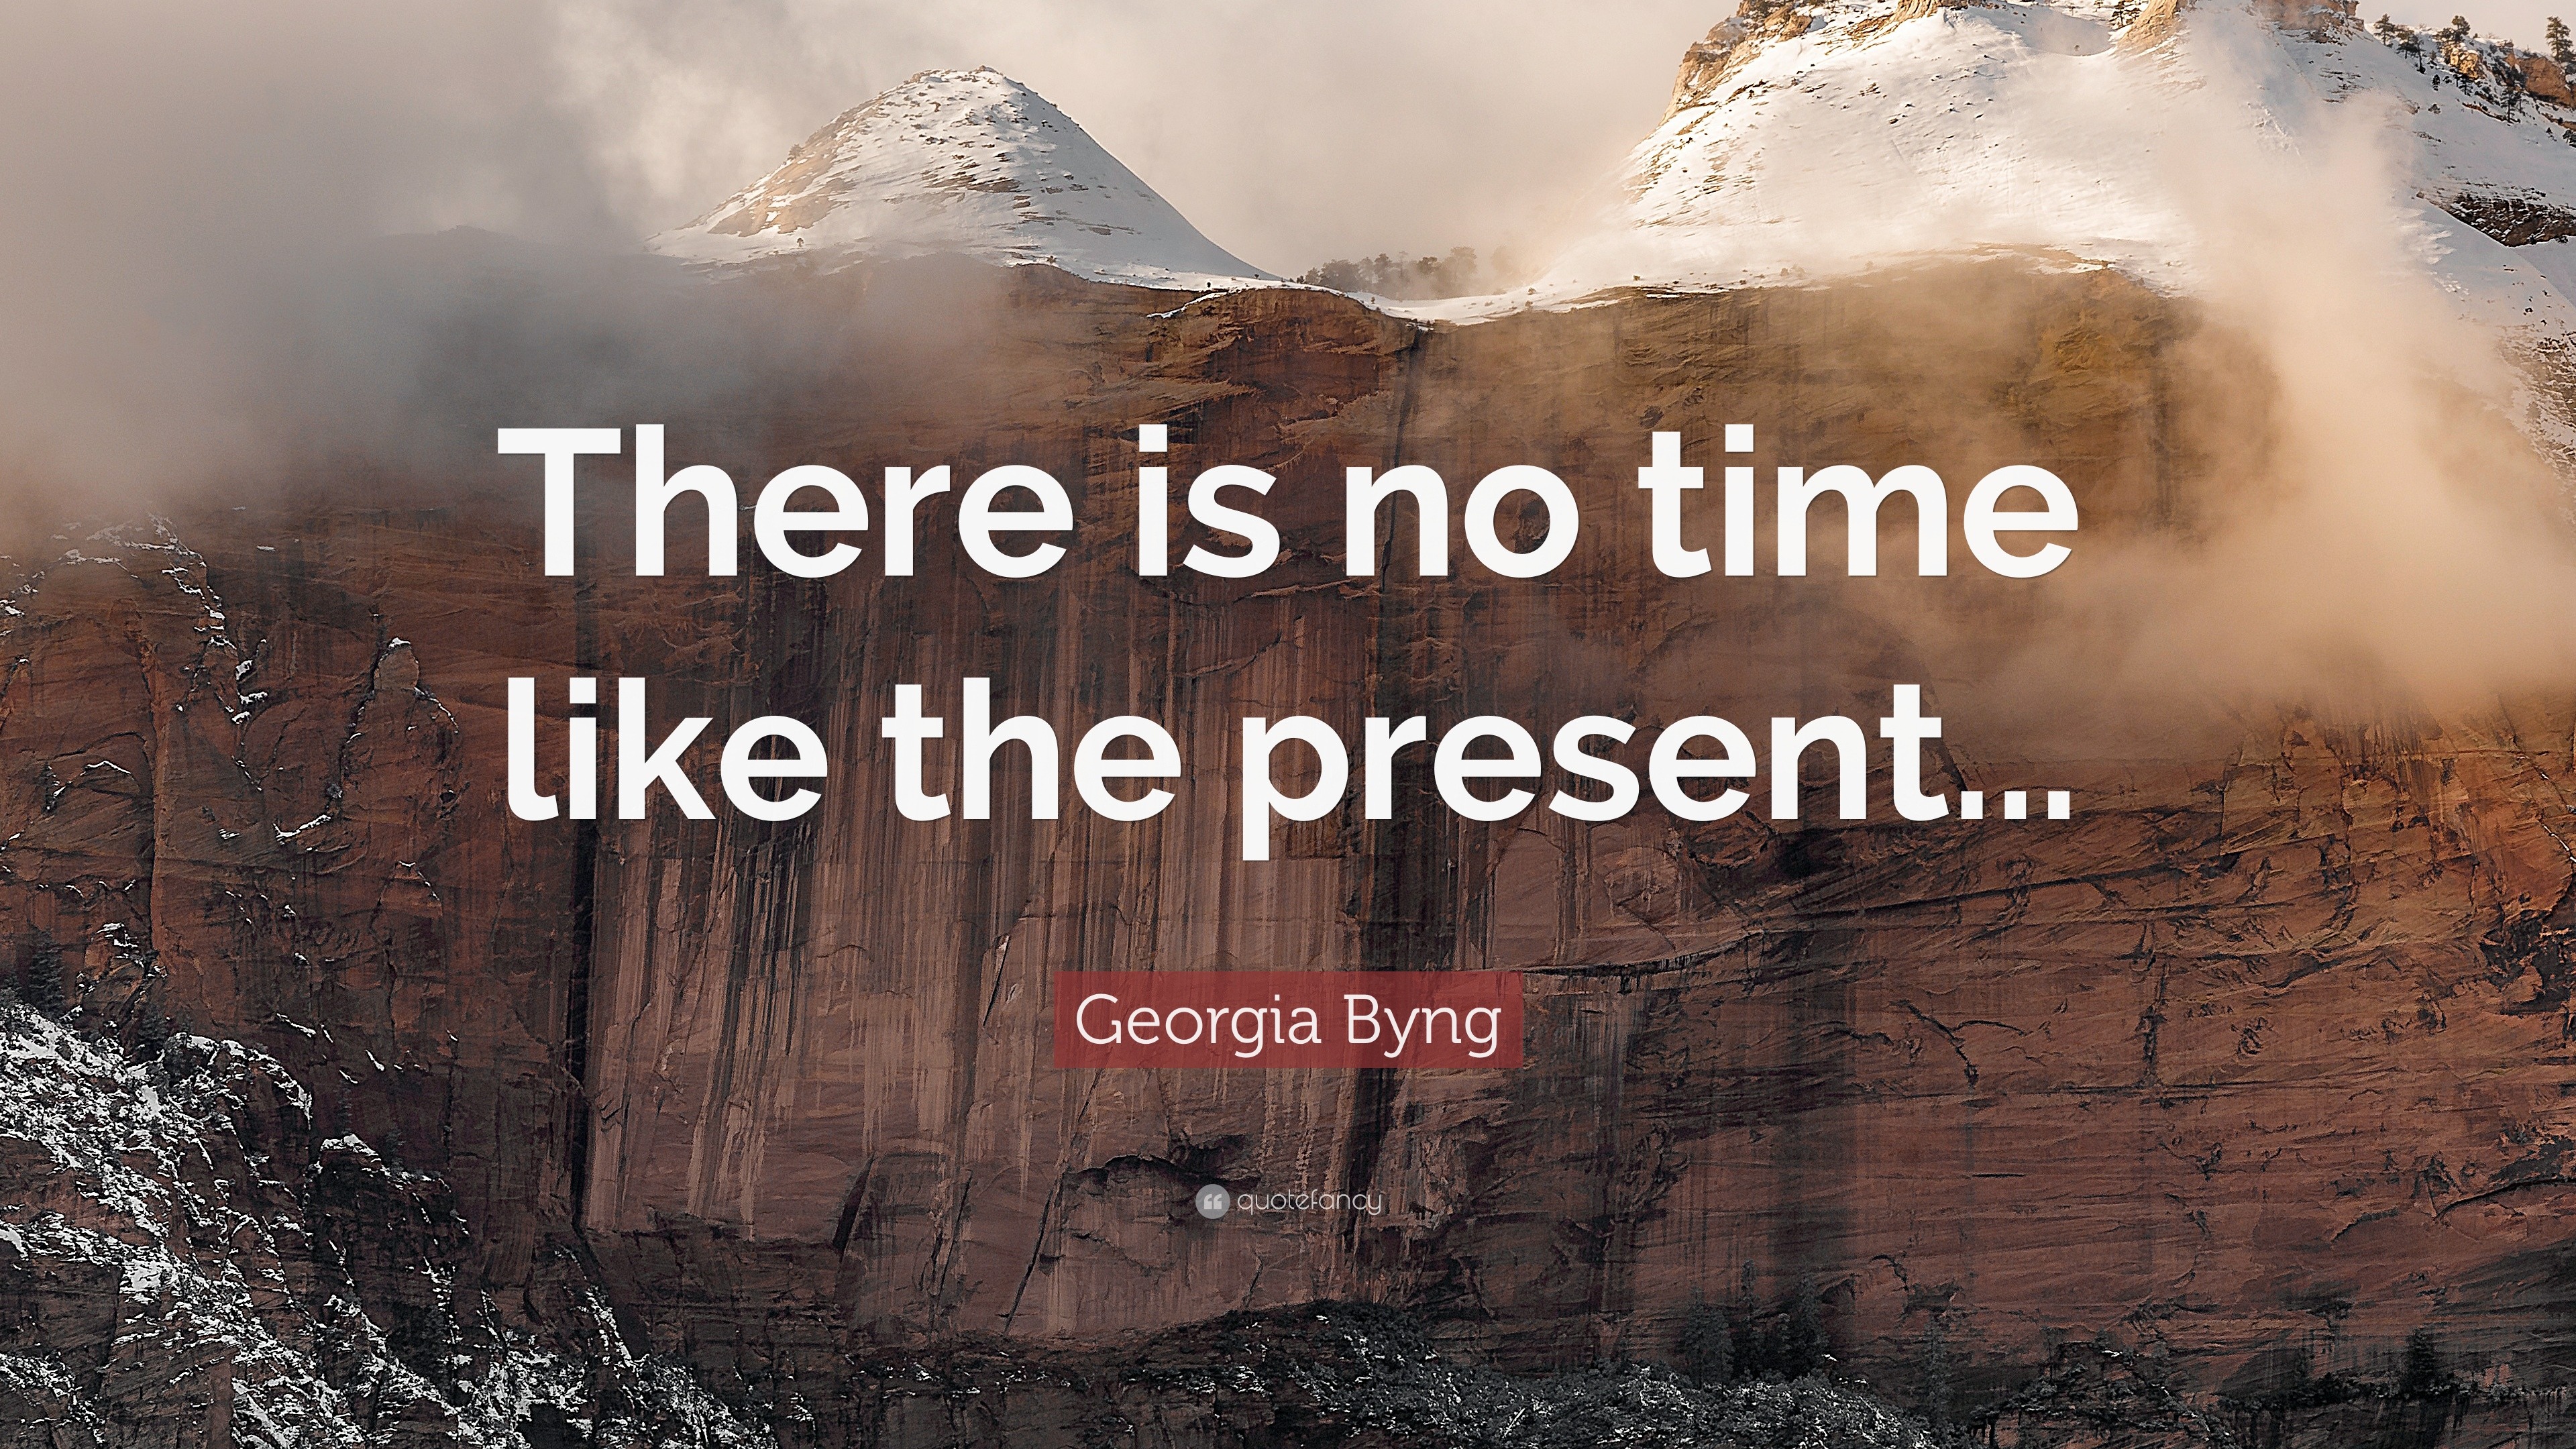 essay on there's no time like the present